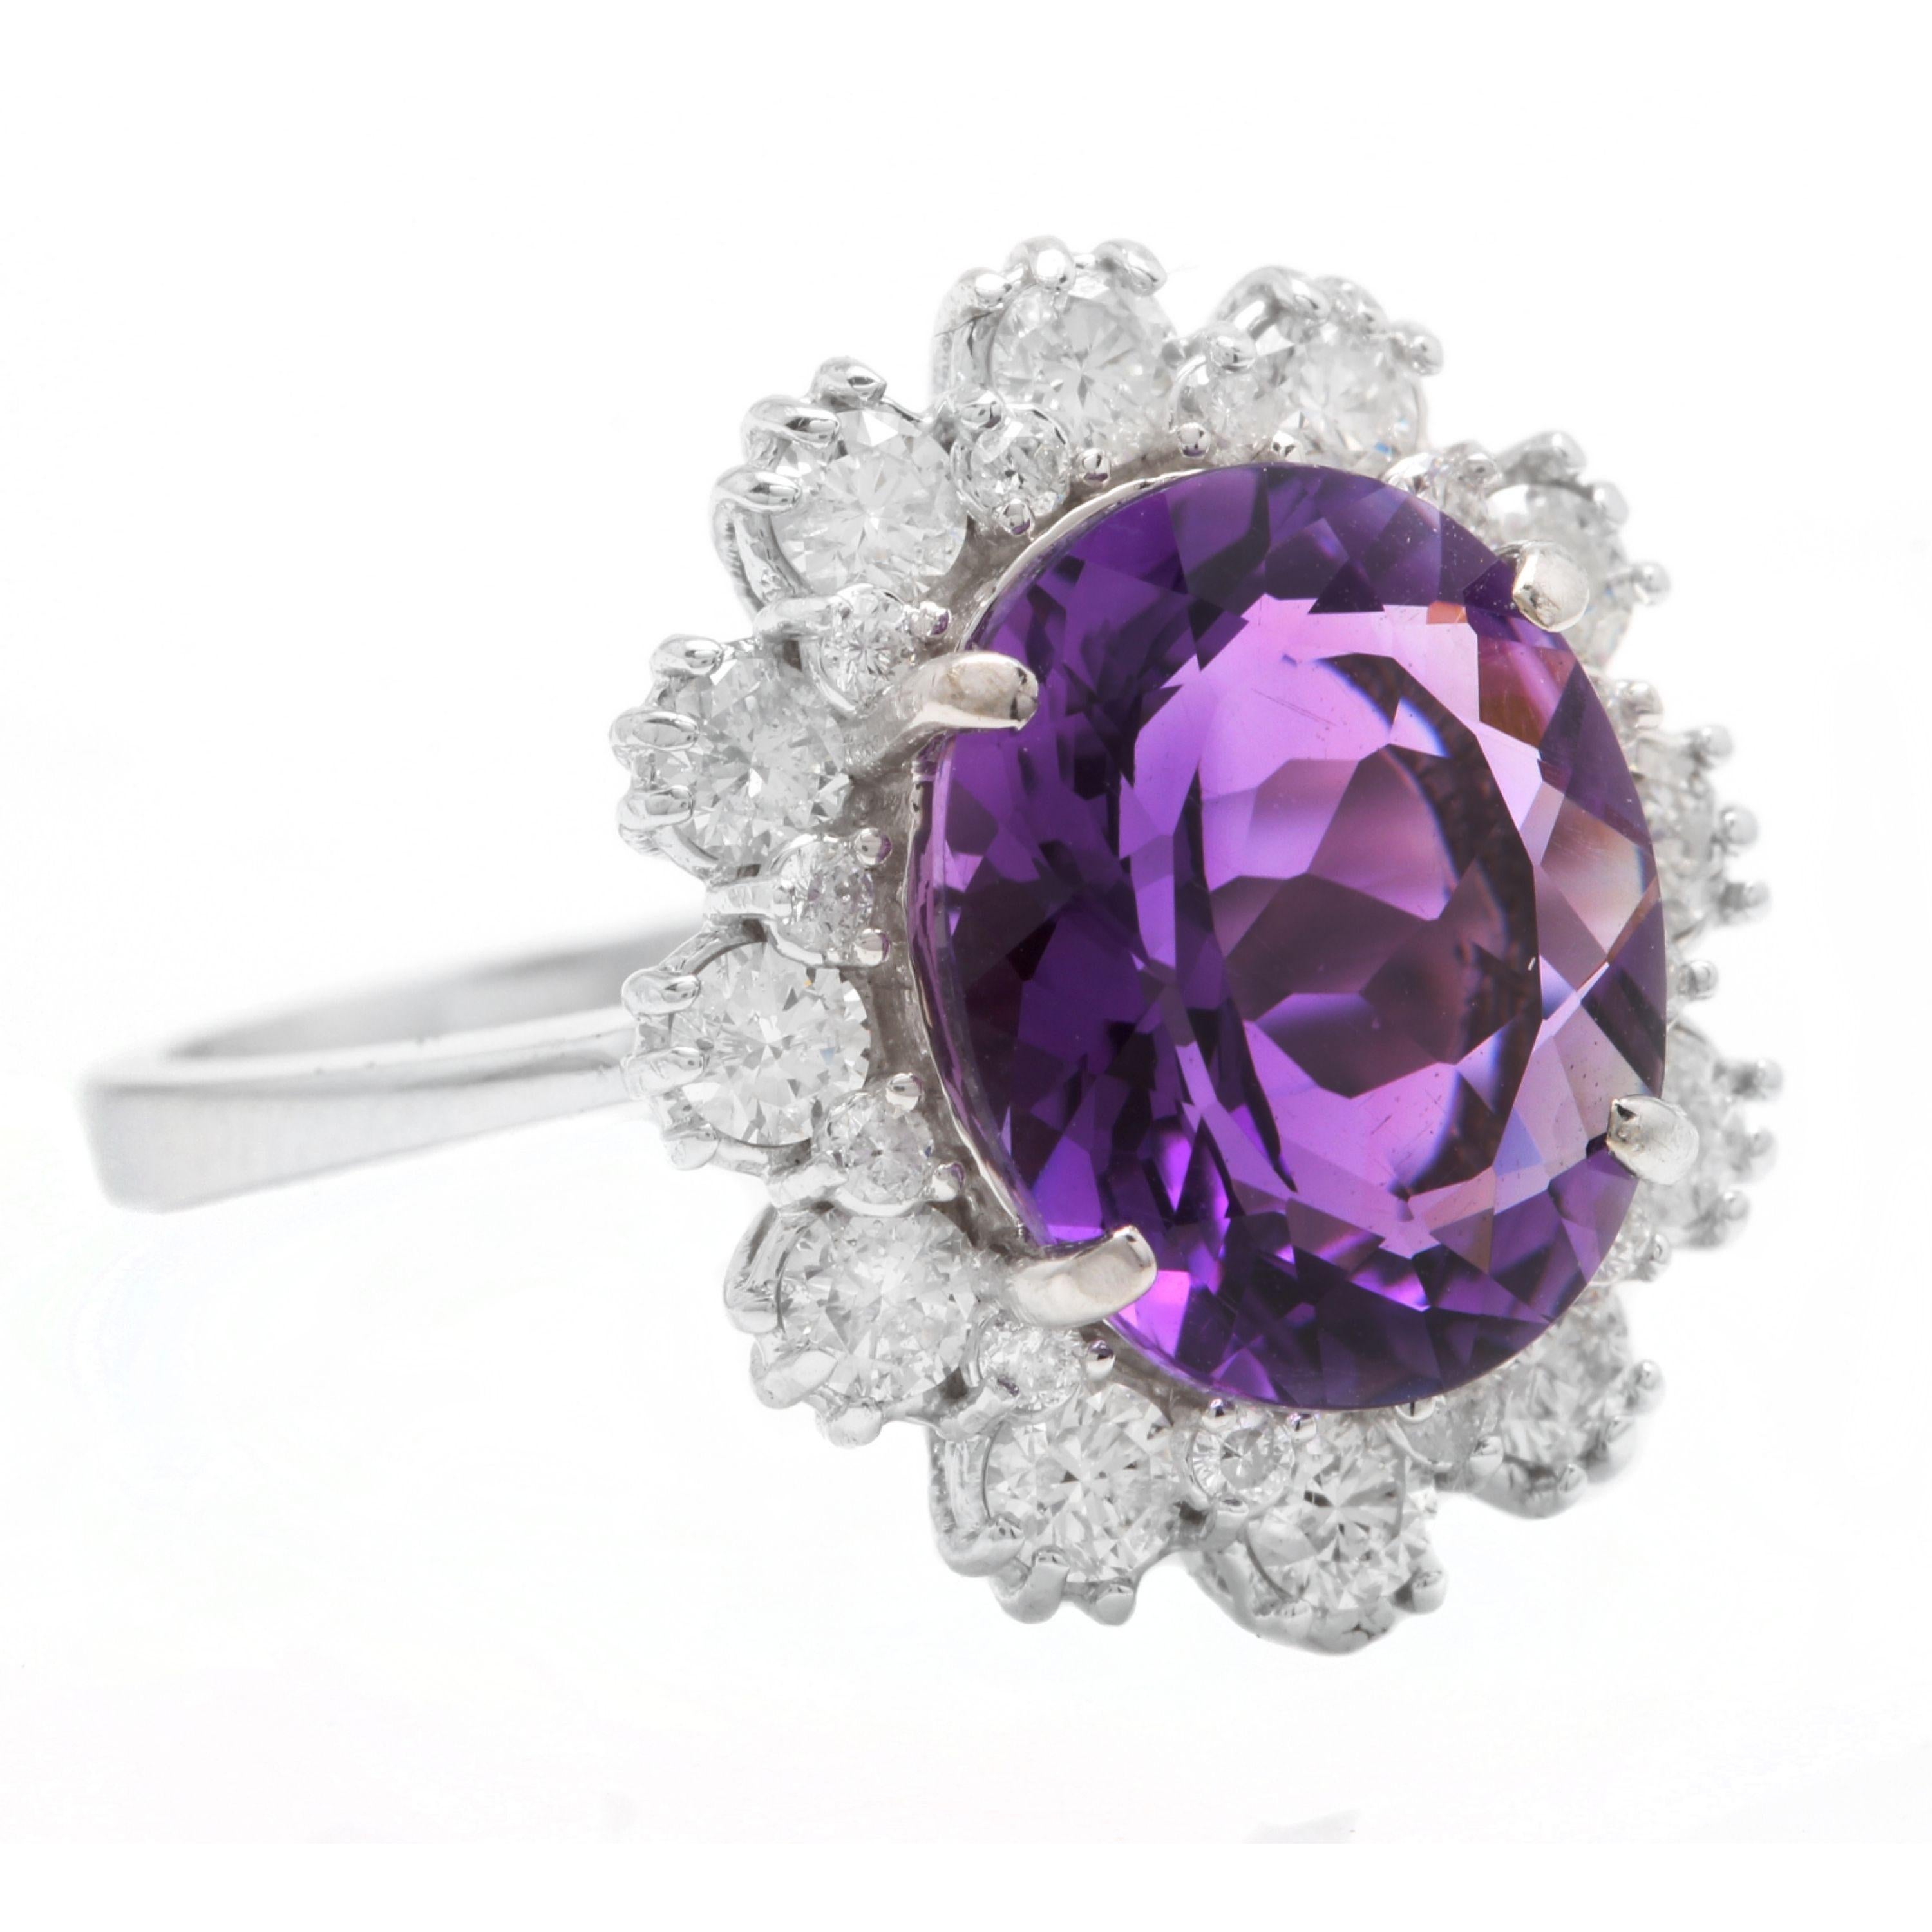 5.20 Carats Natural Amethyst and Diamond 14K Solid White Gold Ring

Total Natural Oval Cut Amethyst Weights: Approx. 4.00 Carats

Amethyst Measures: Approx. 12.00 x 10.00mm

Natural Round Diamonds Weight: Approx. 1.20 Carats (color G-H / Clarity